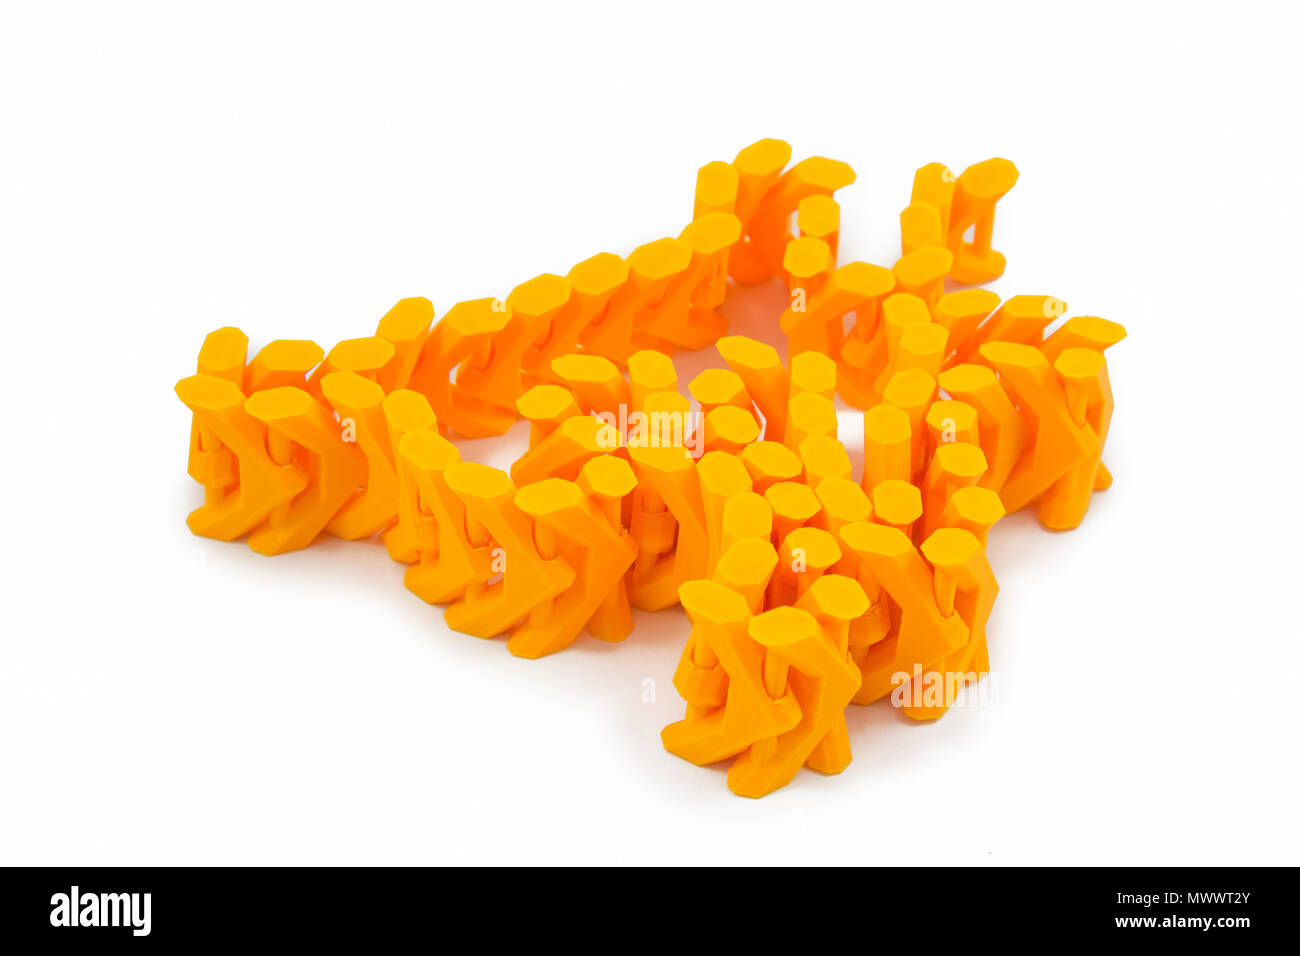 Orange Chain Shaped Object Printed With 3D Printer Stock Photo